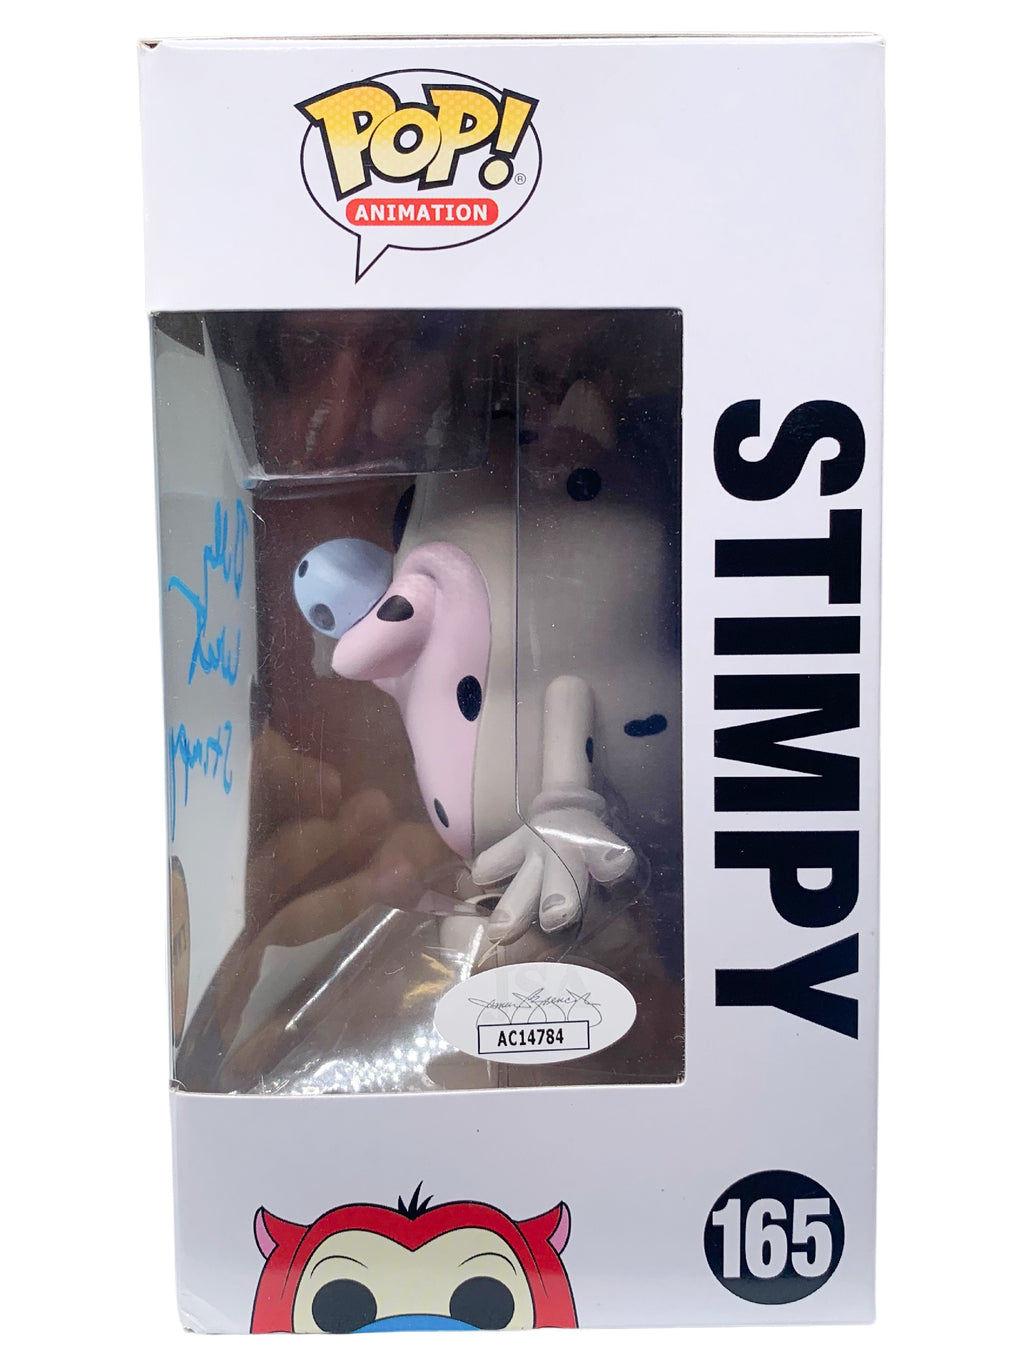 Billy West autographed signed inscribed Funko Pop JSA COA The Ren & Stimpy Show